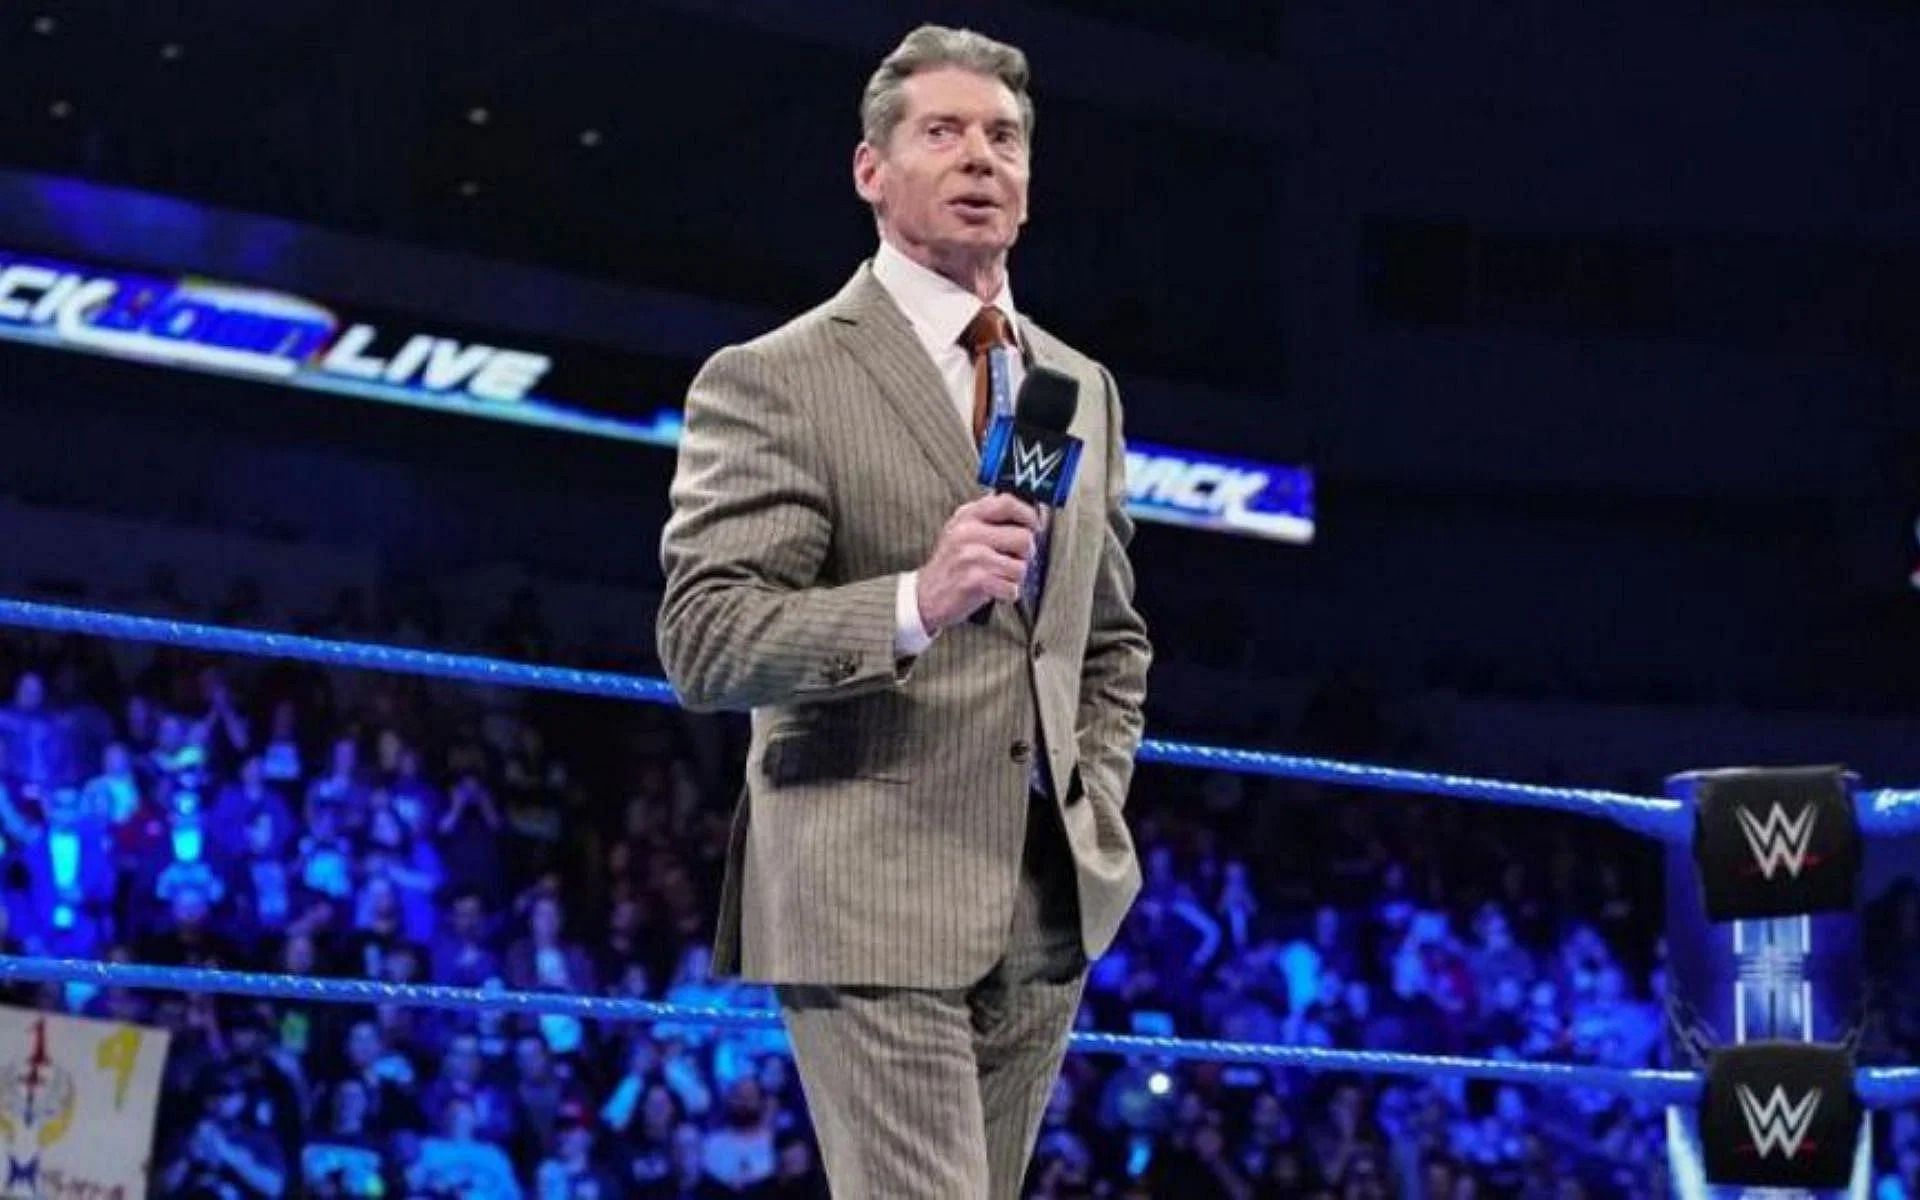 Vince McMahon appeared on RAW and SmackDown recently.